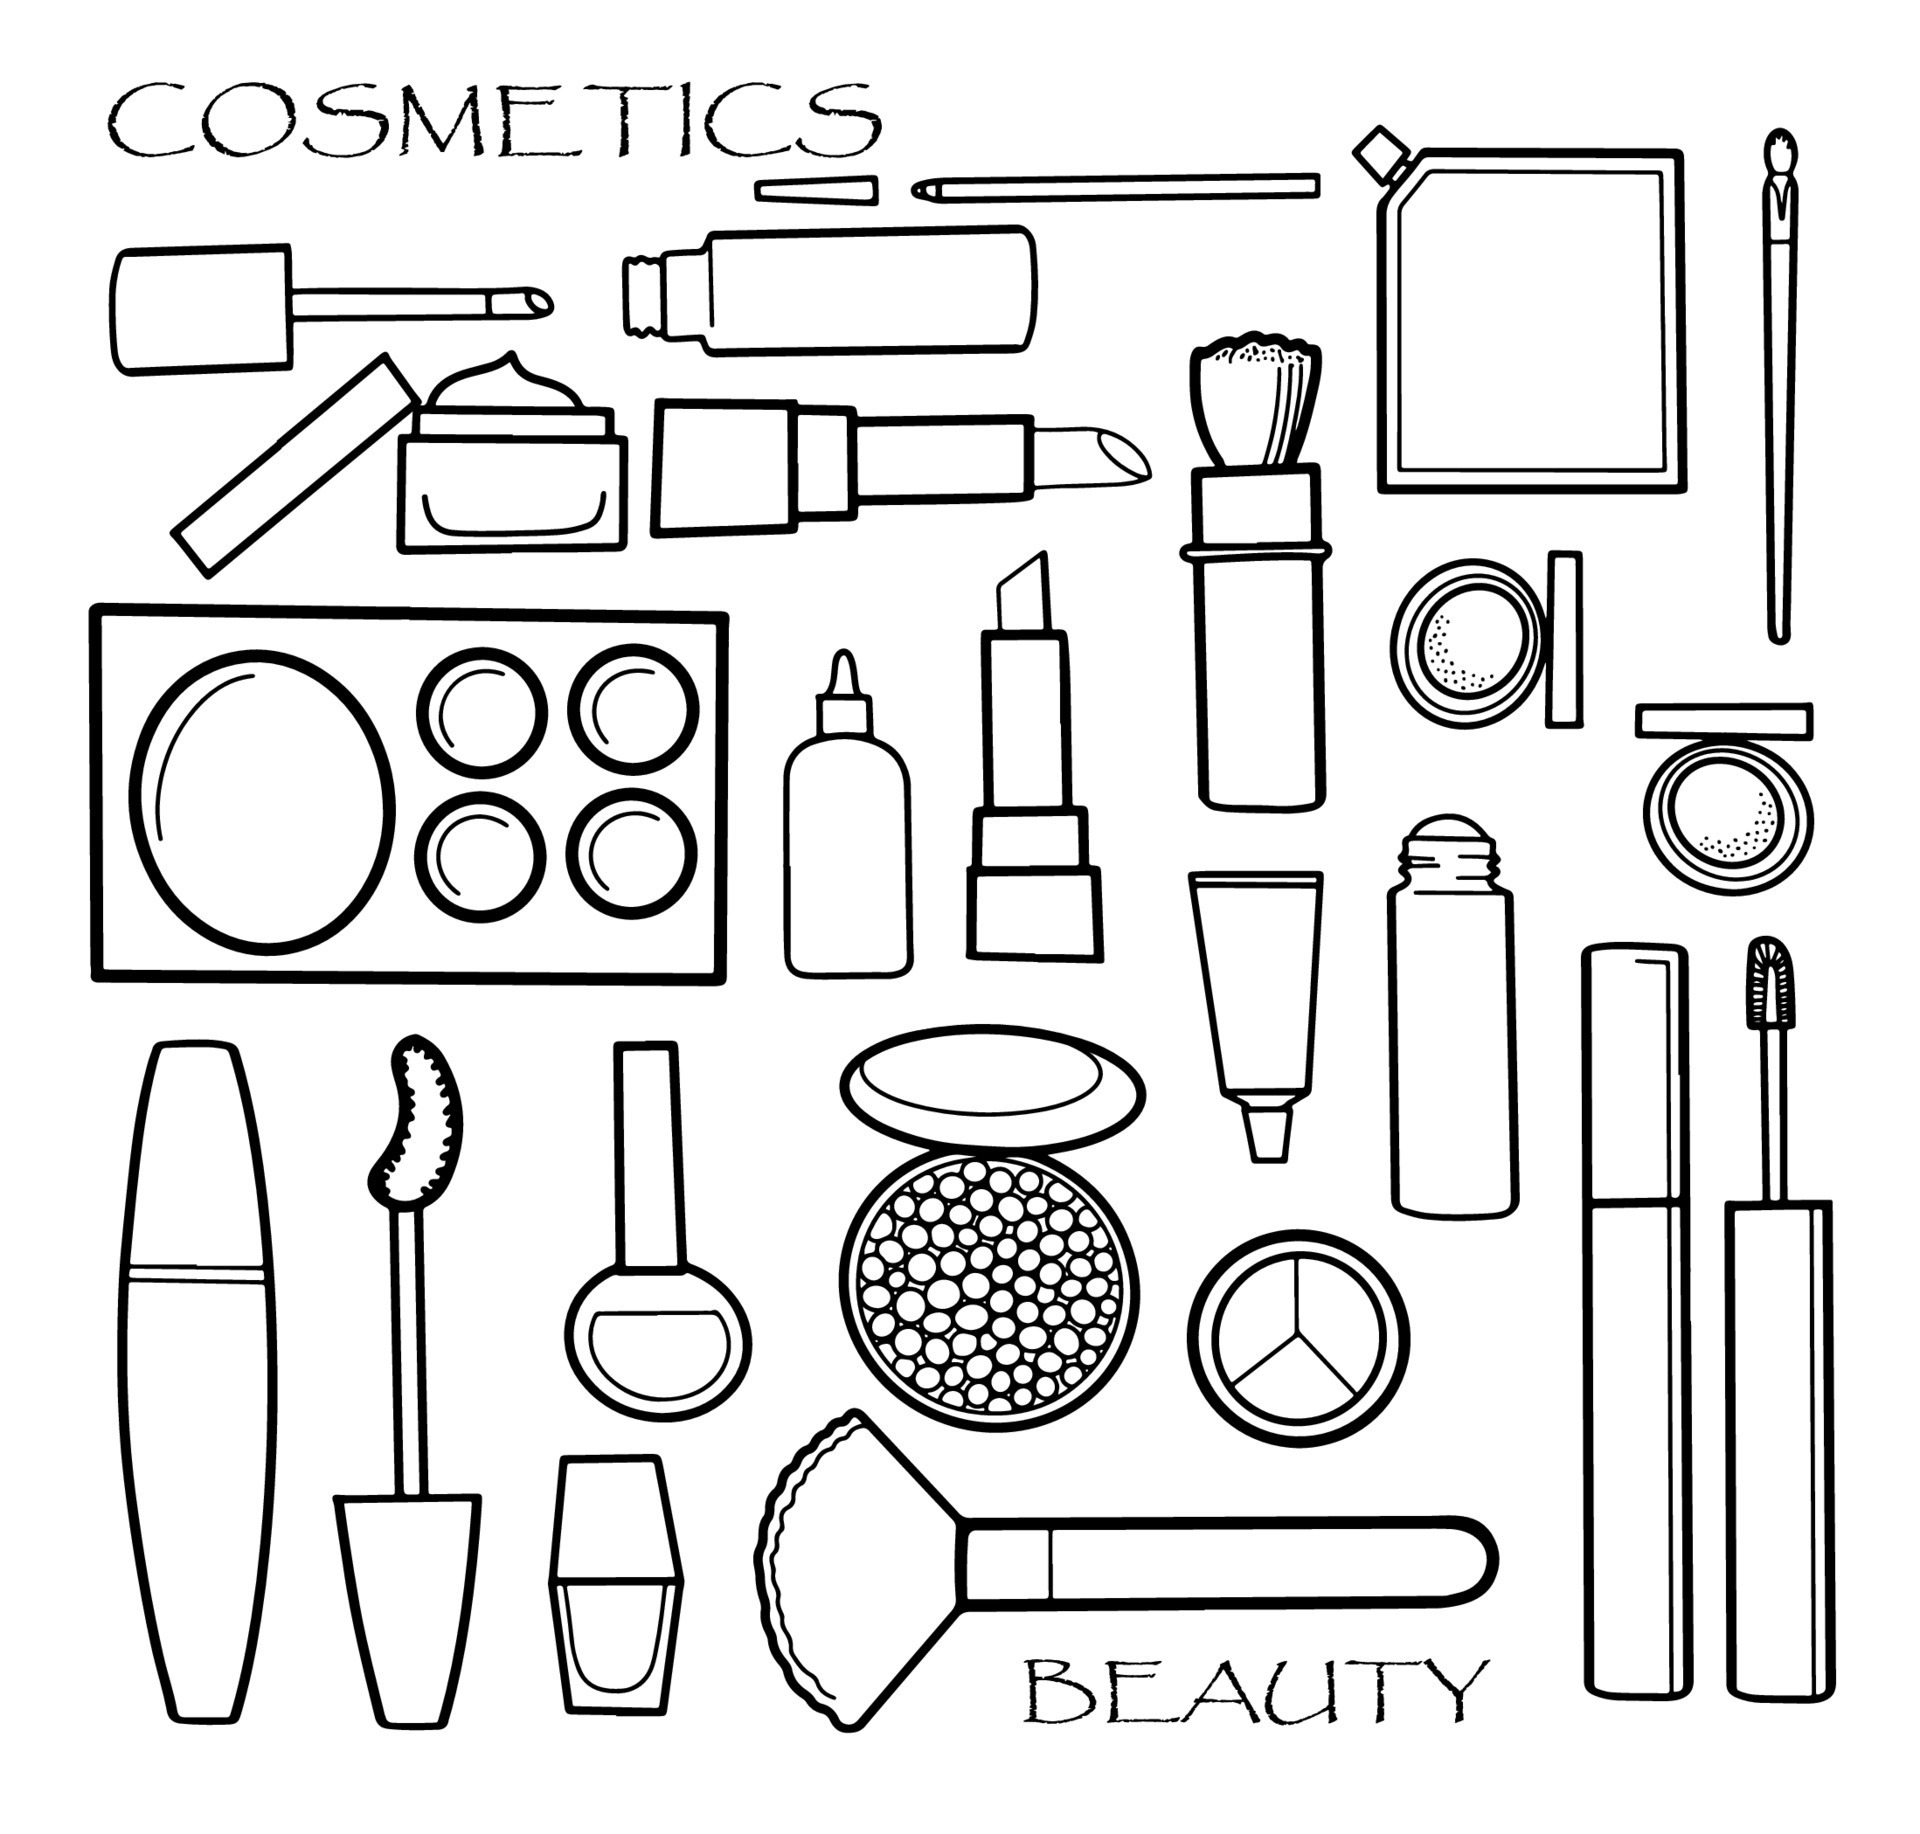 Makeup artist and beauty salon professional kit collection Beauty sketch   stock vector 2584882  Crushpixel